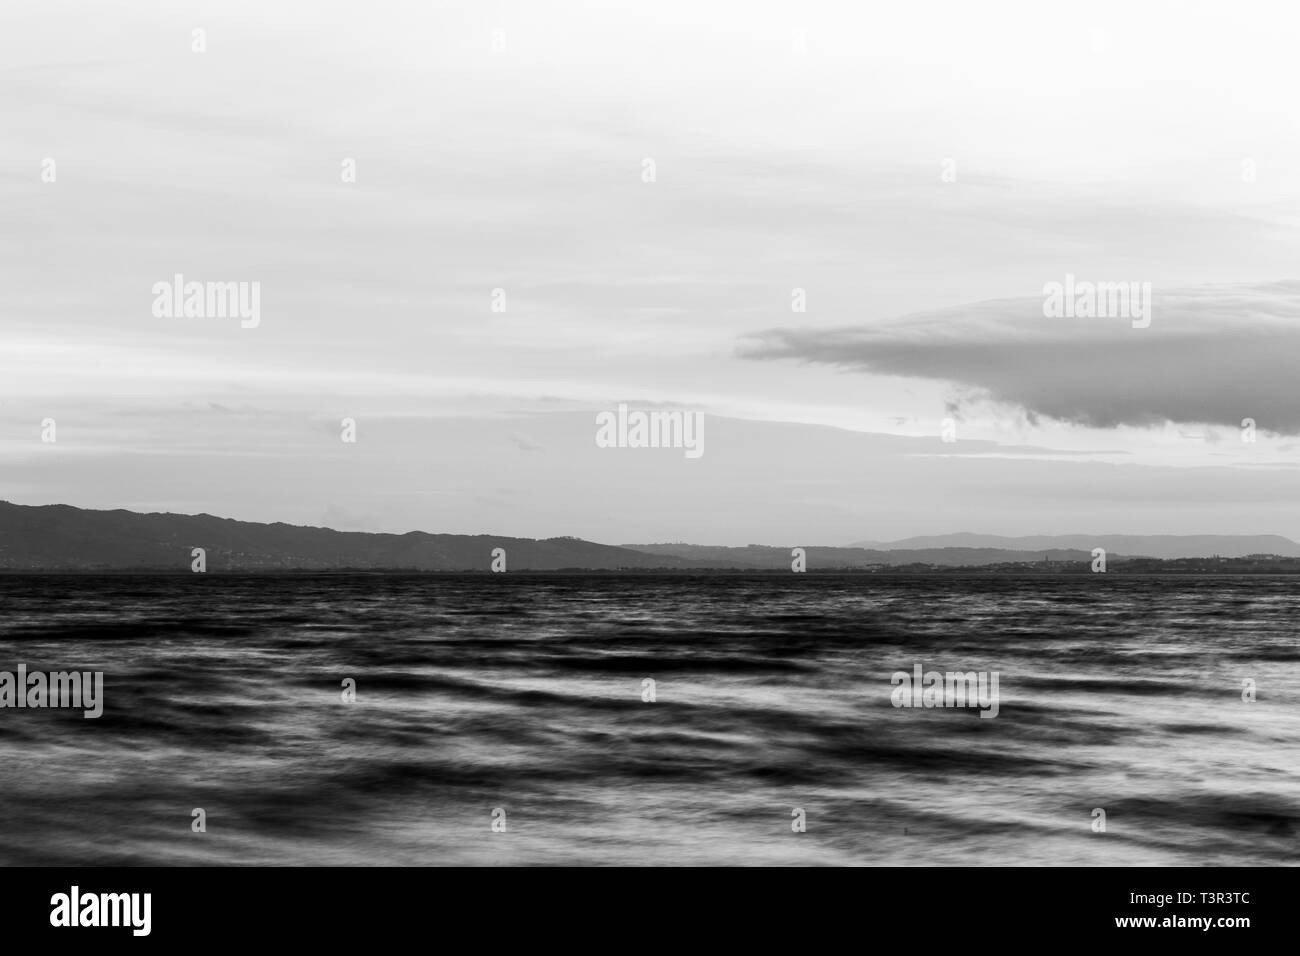 Close view of moving waves on a lake at dusk Stock Photo